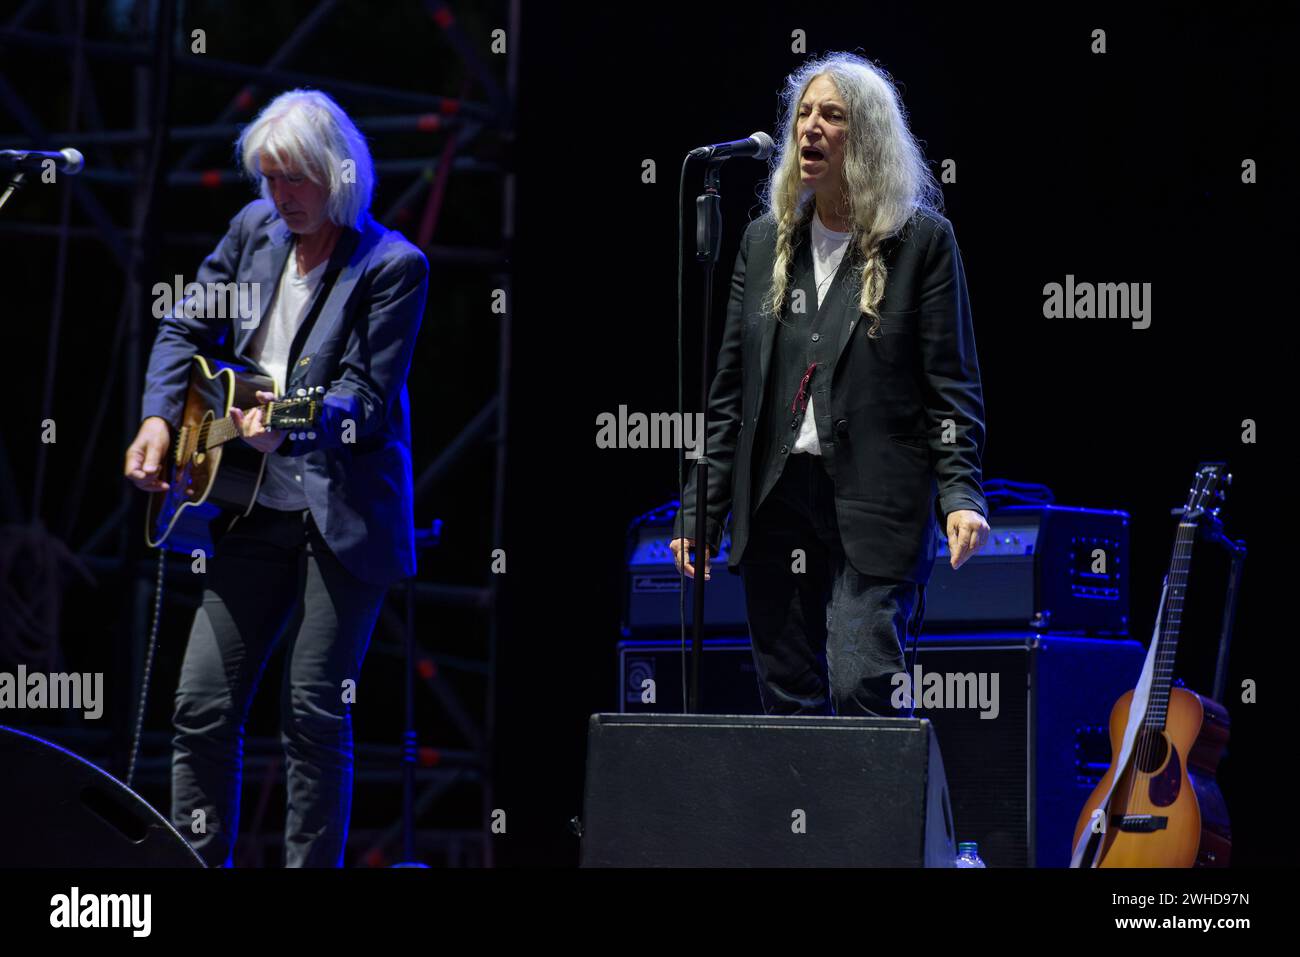 Alba - Italy - 2021 July 21st - The American poetess singer and songwriter PATTI SMITH performs live at Collisioni Festival Photo by Luca Moschini Stock Photo